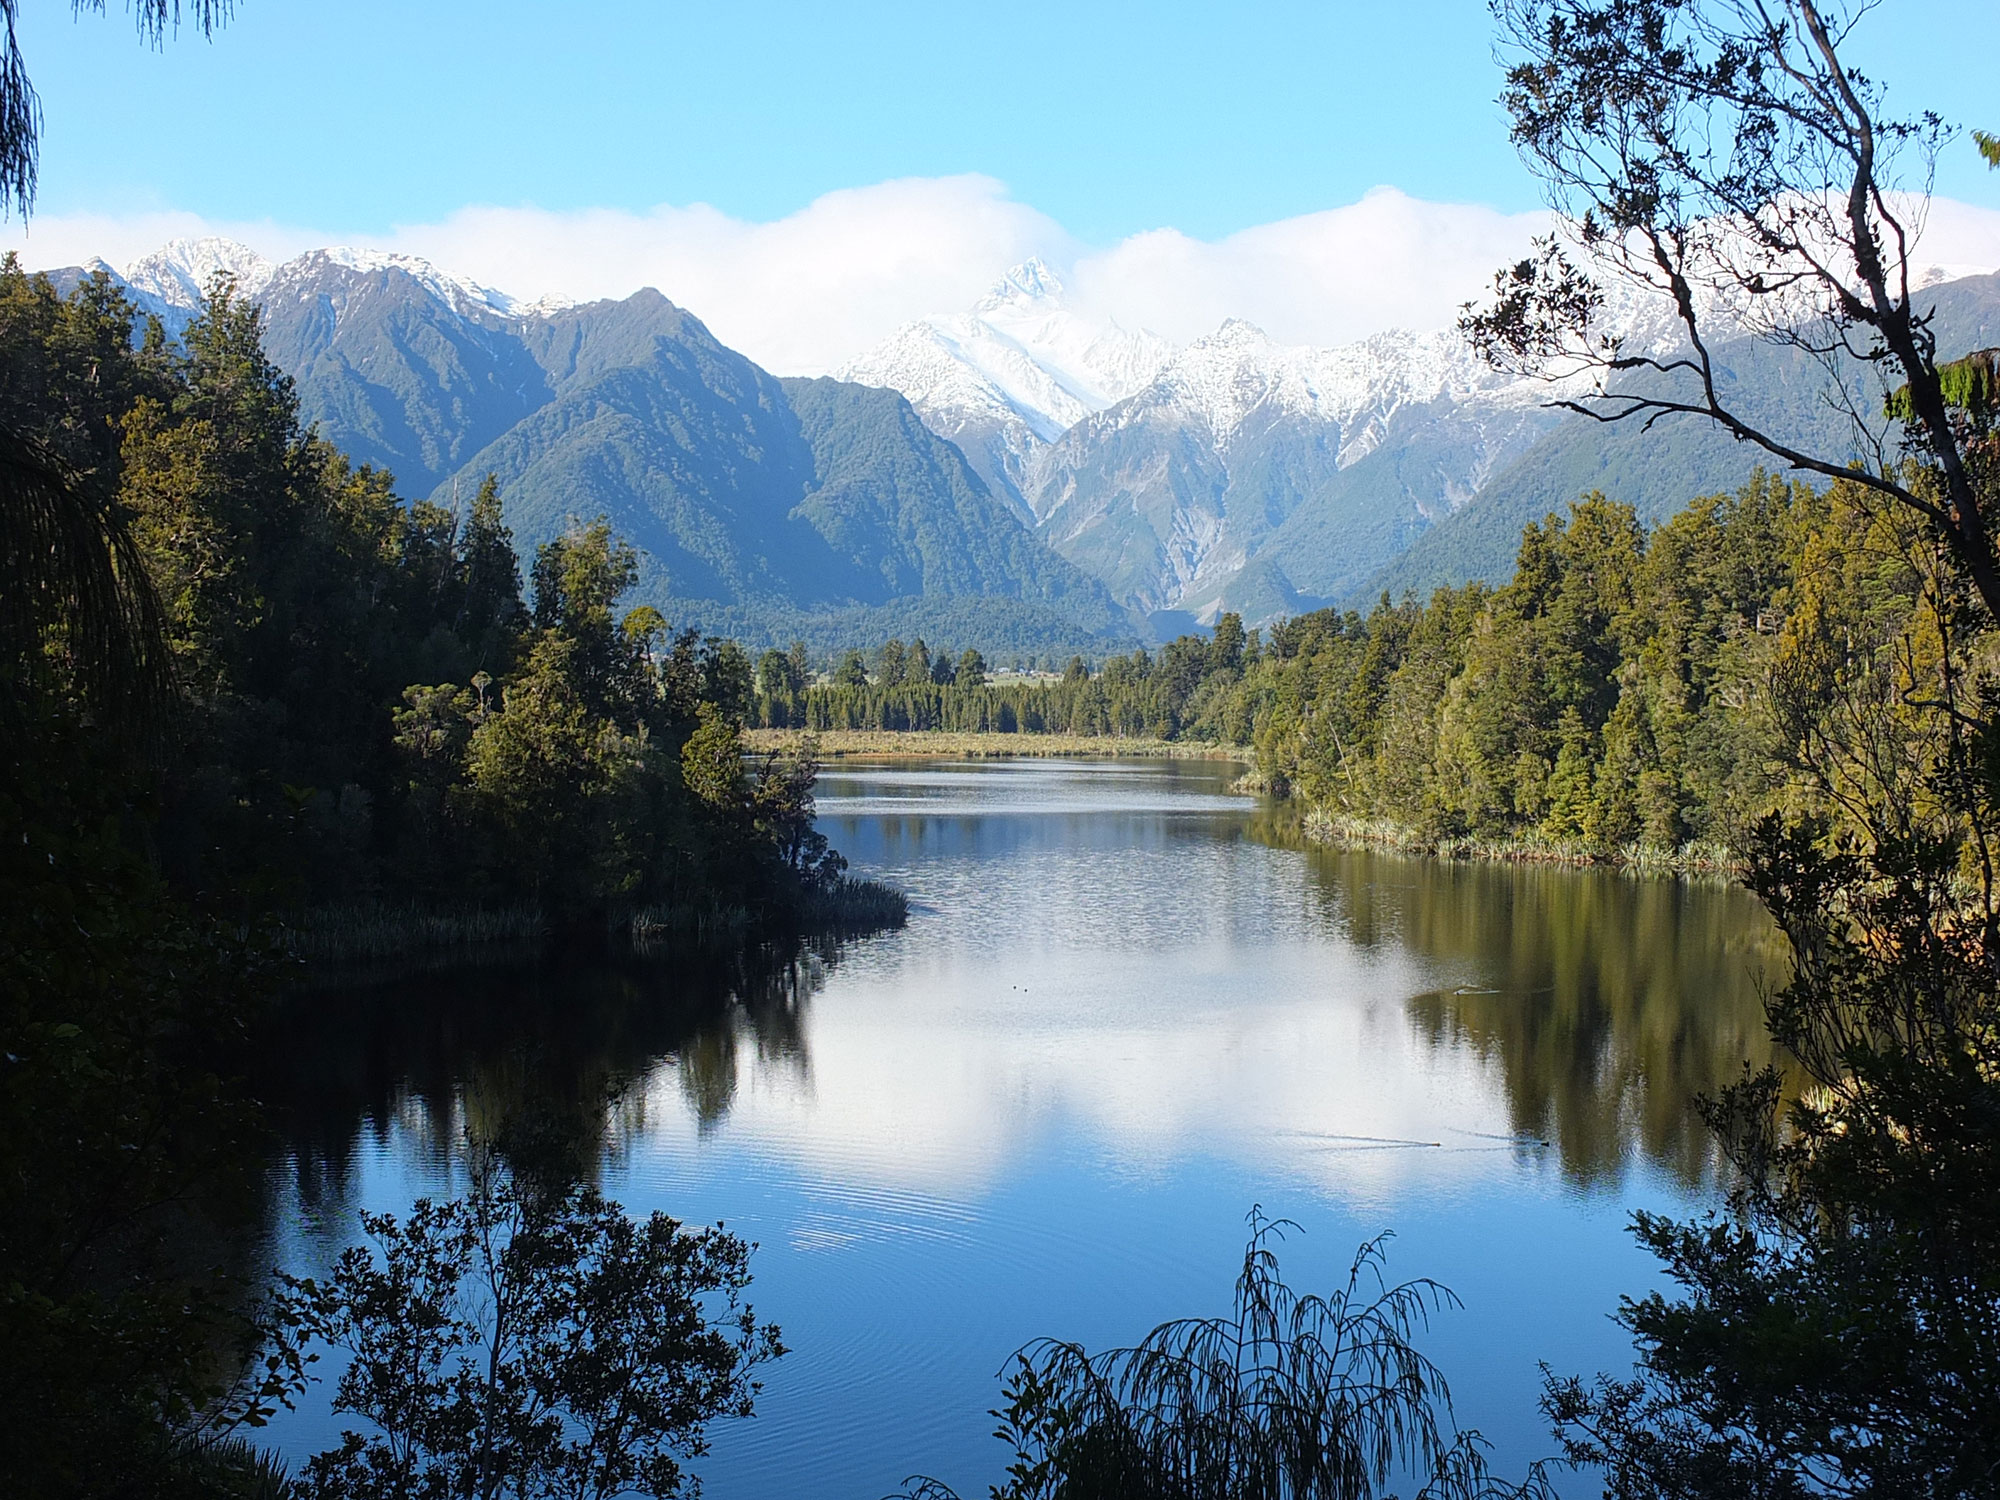 Scenic small group tours of New Zealand